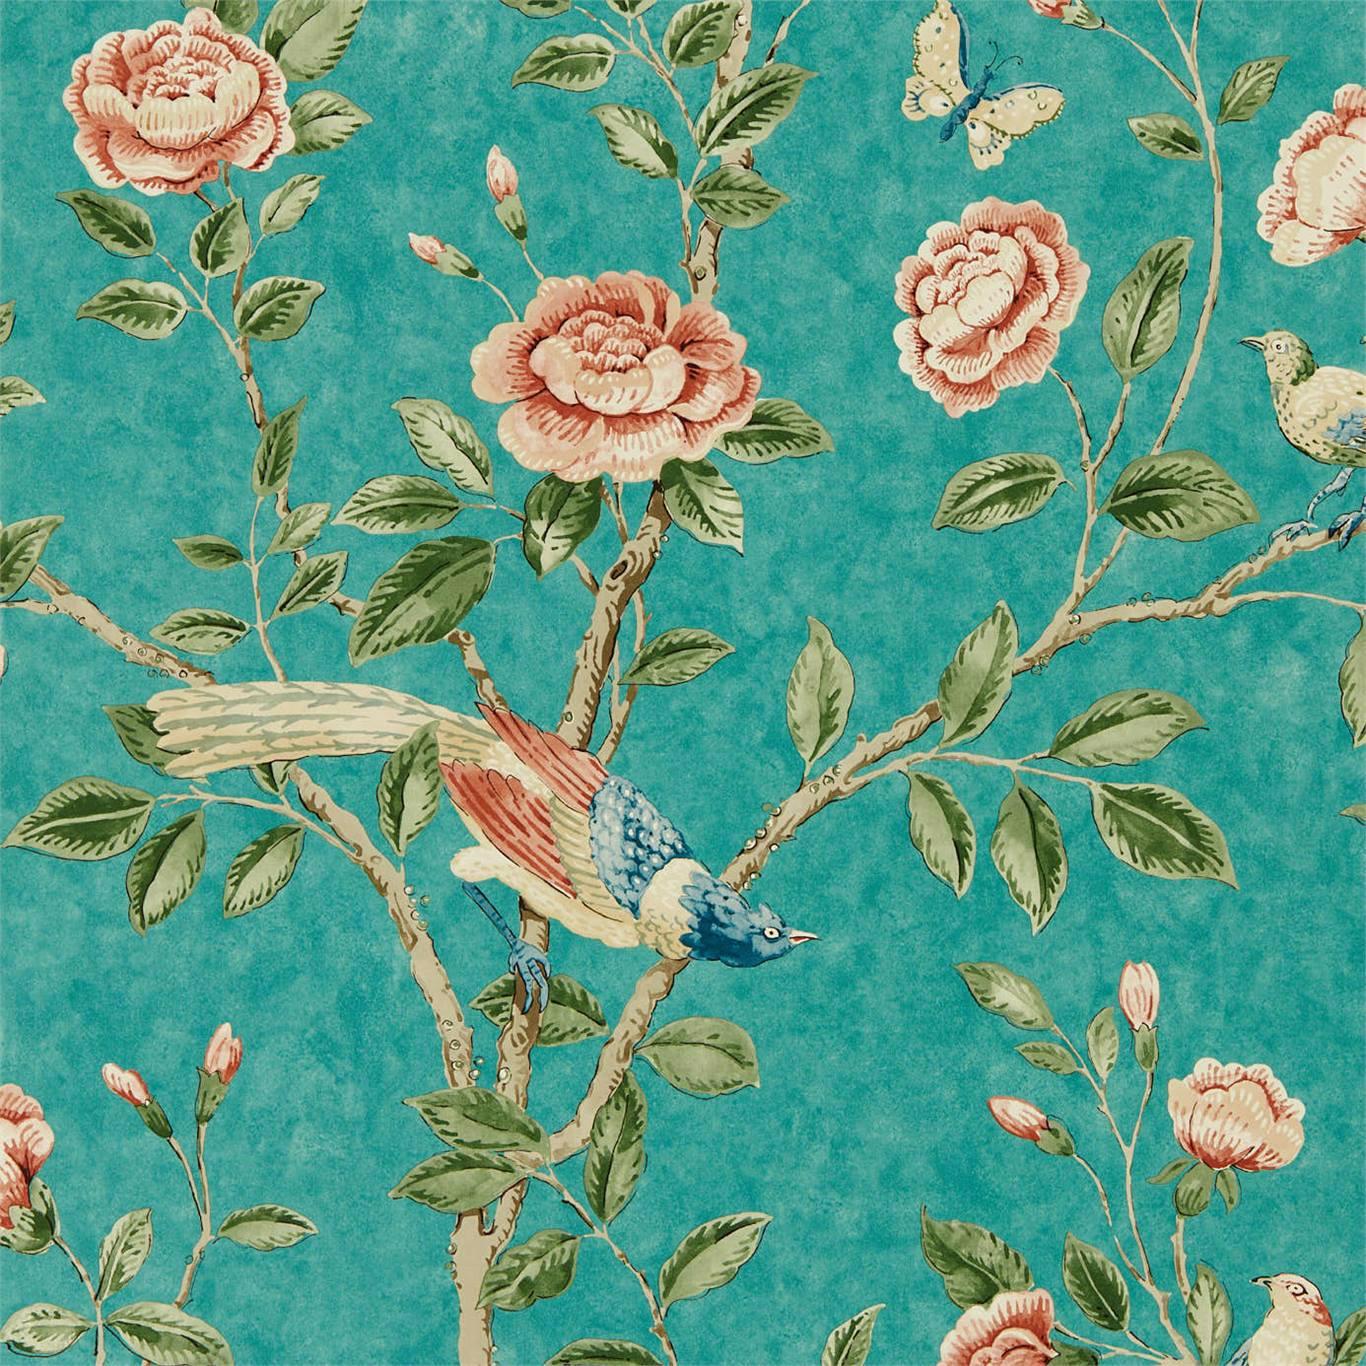 Andhara Teal/Tumeric Wallpaper DCPW216796 by Sanderson